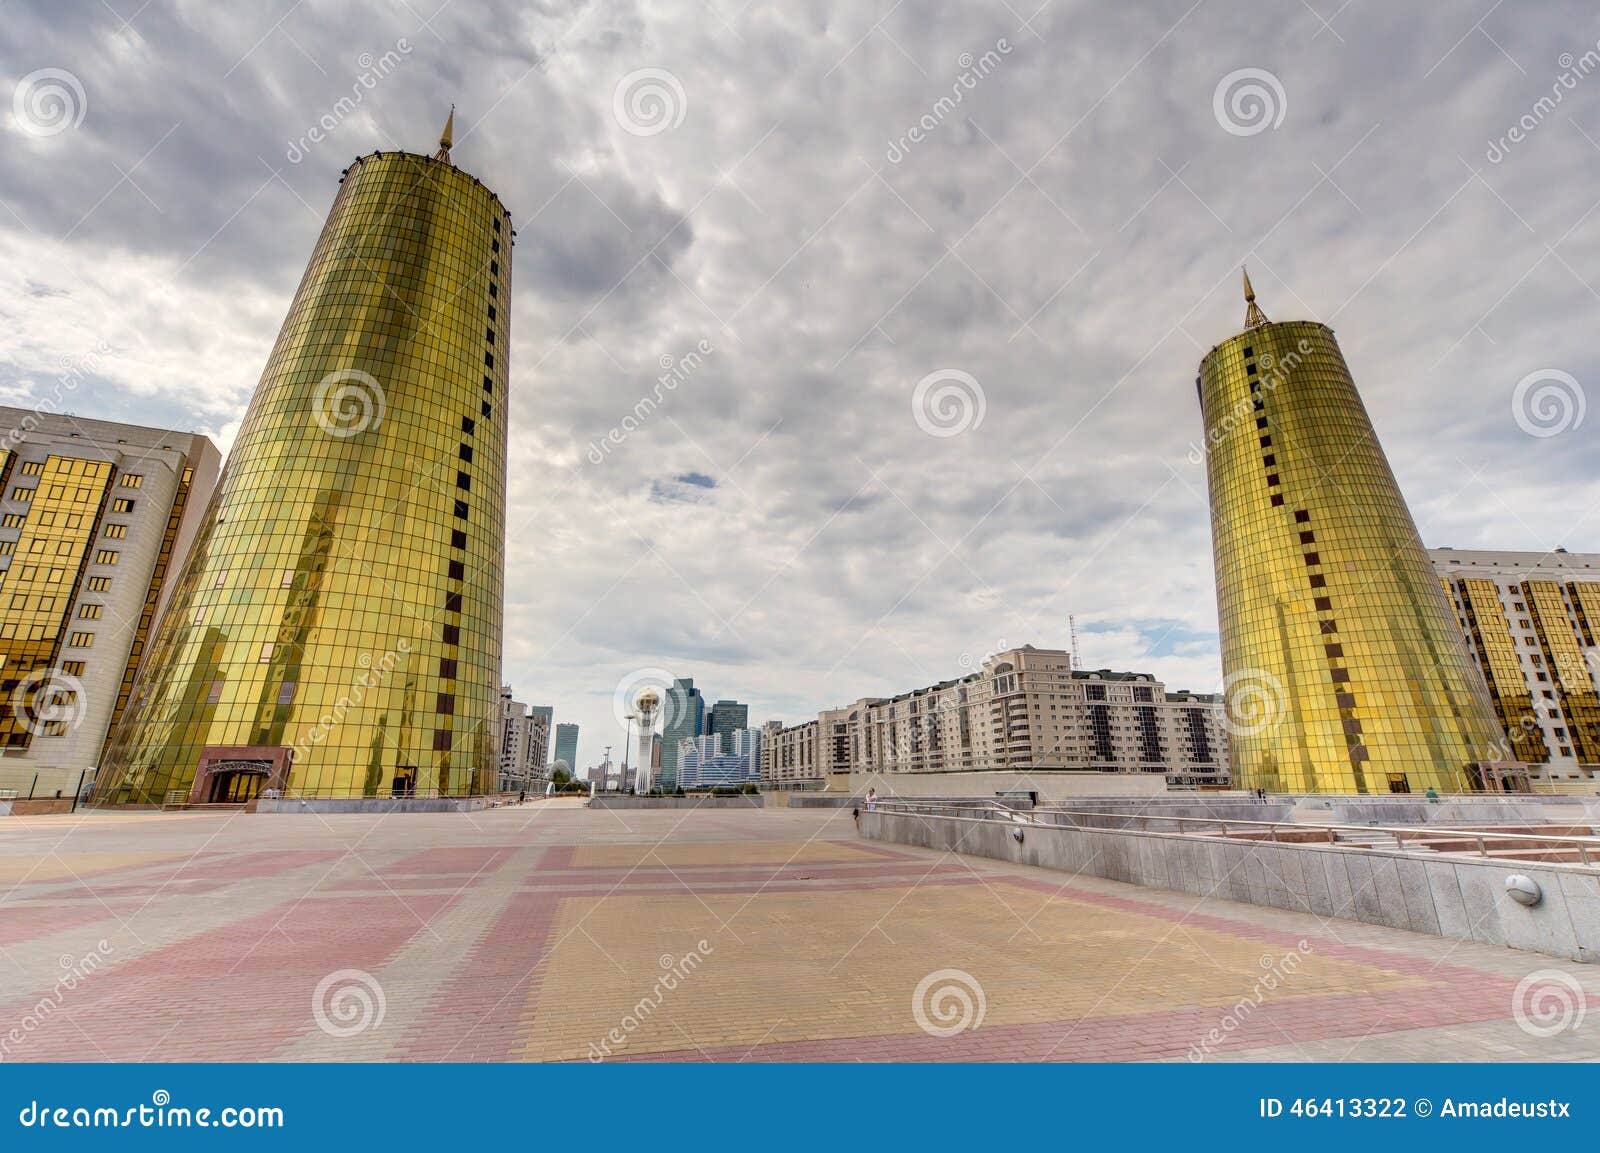 twin towers in governmental district, astana